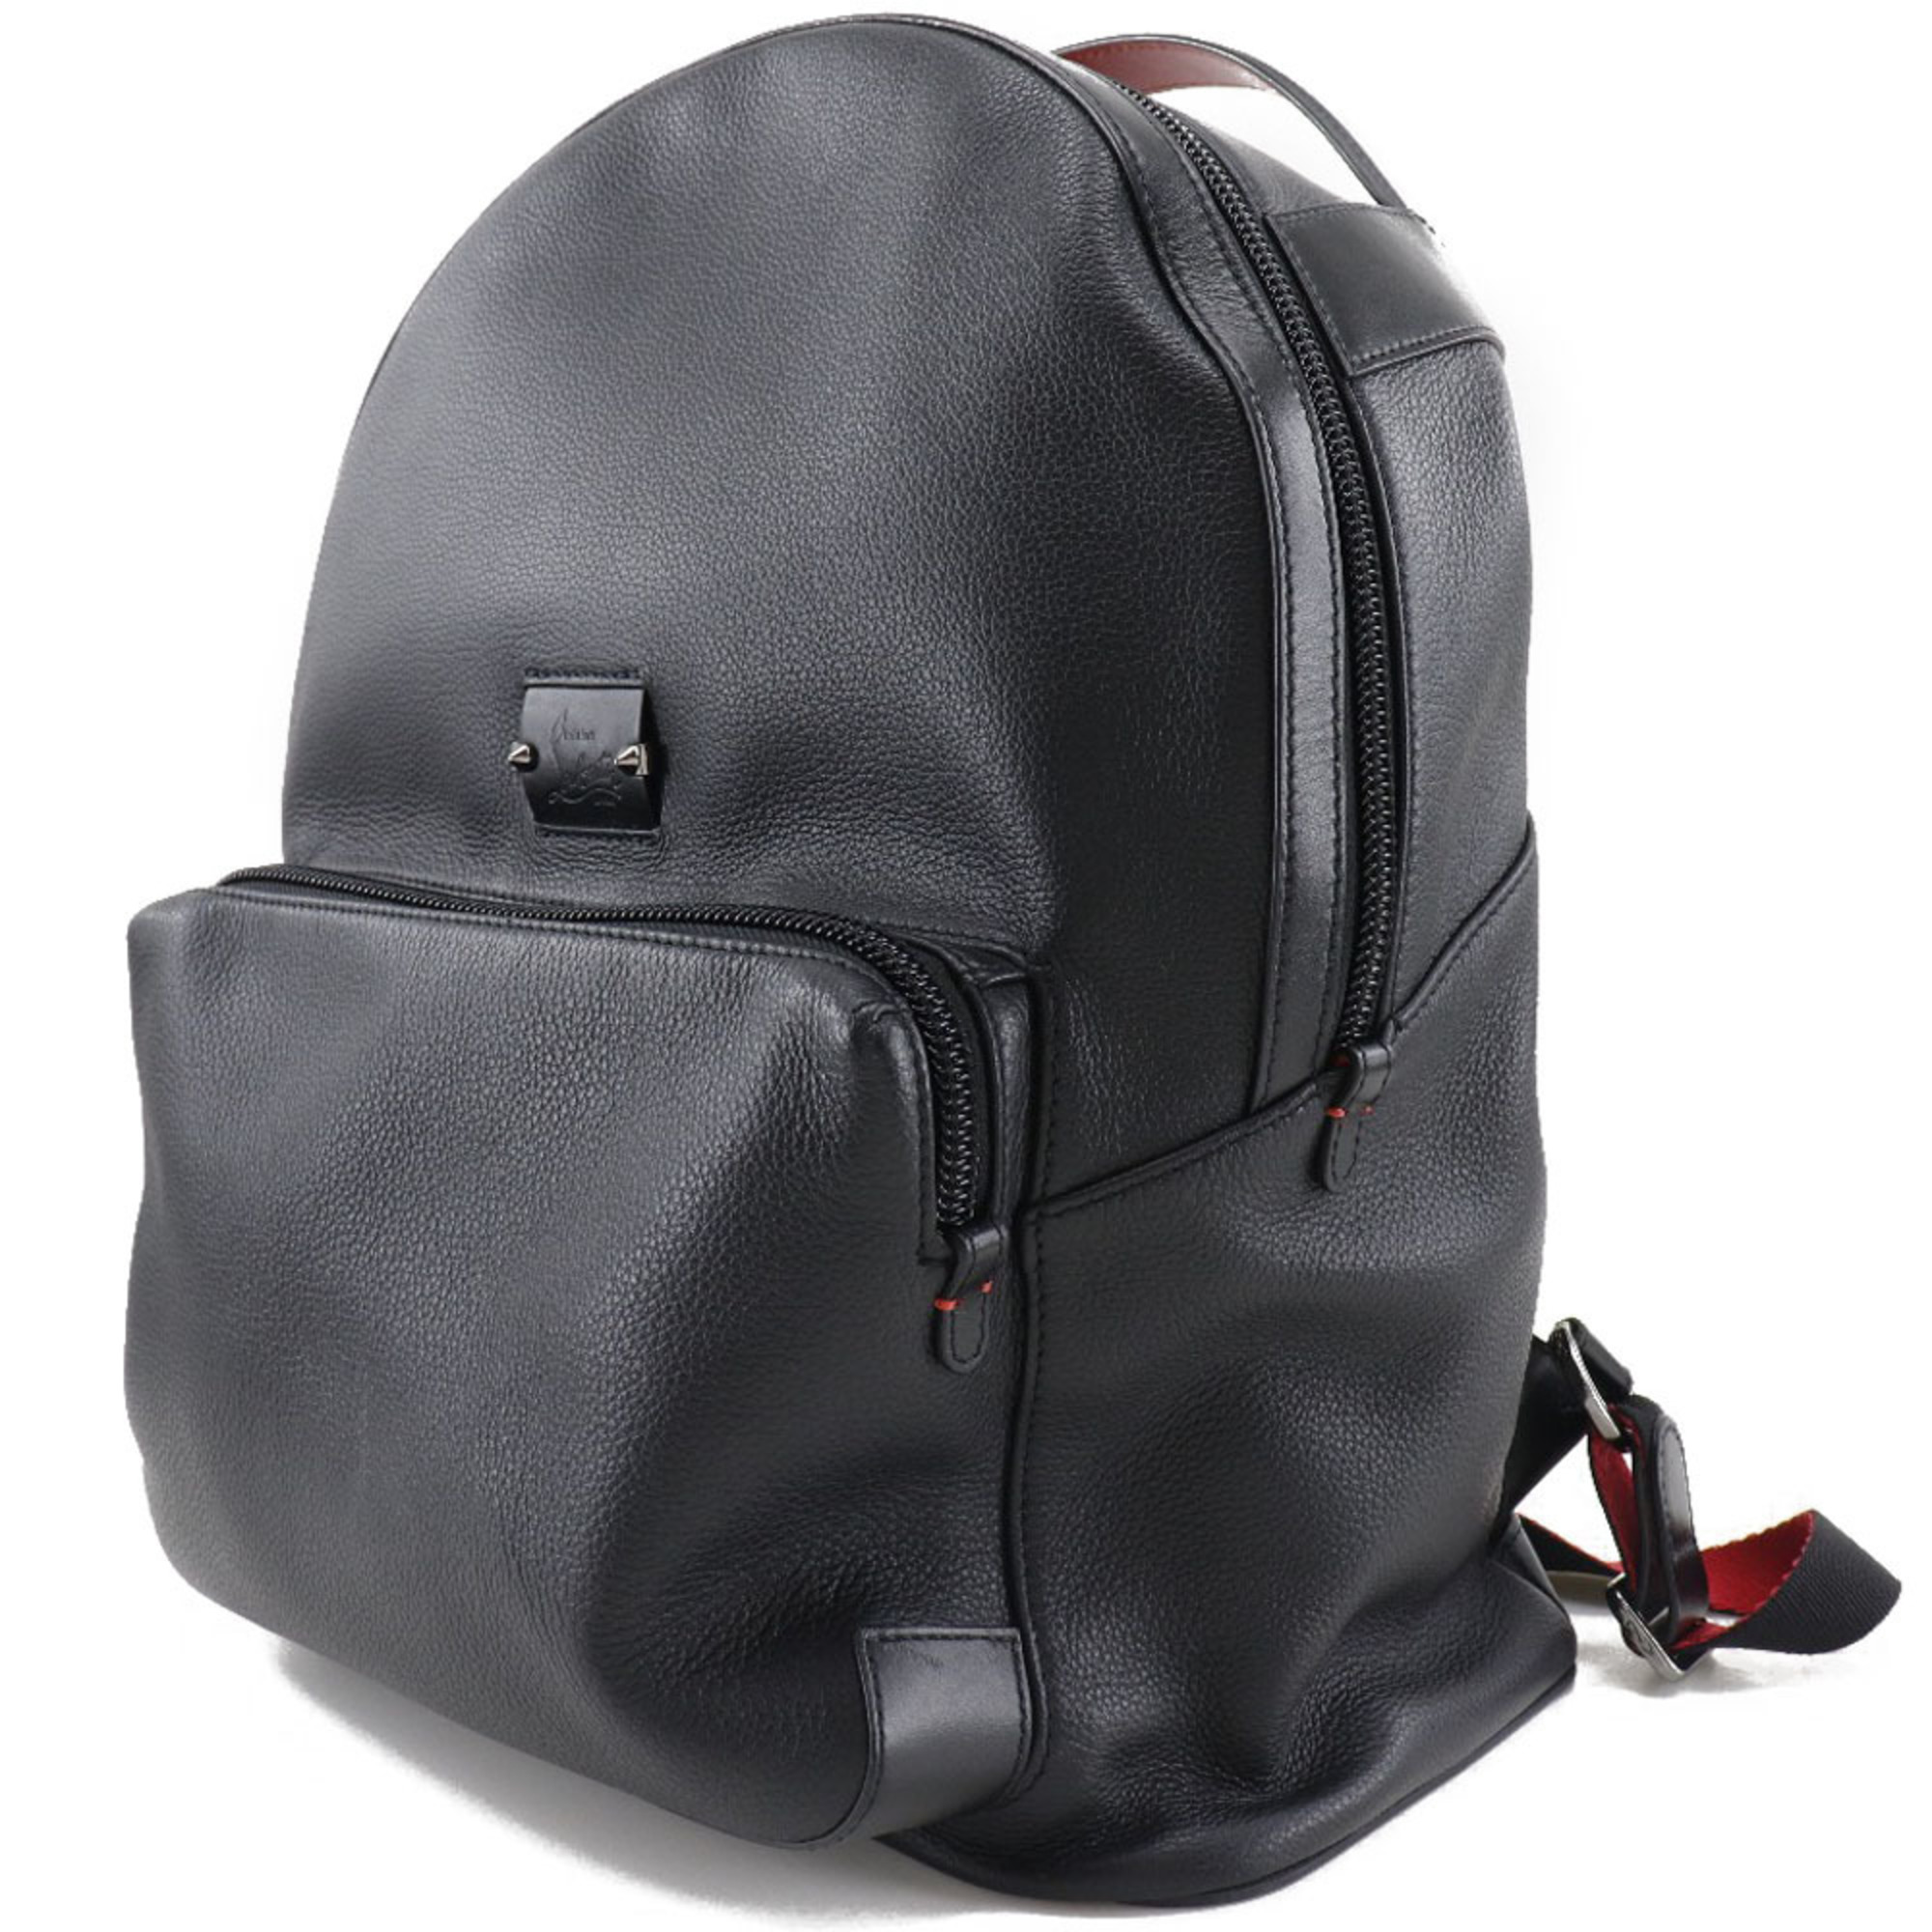 Christian Louboutin Backpack with Buckle Bi Studs 1185129CM53 Leather Black Unisex Rucksack/Daypack